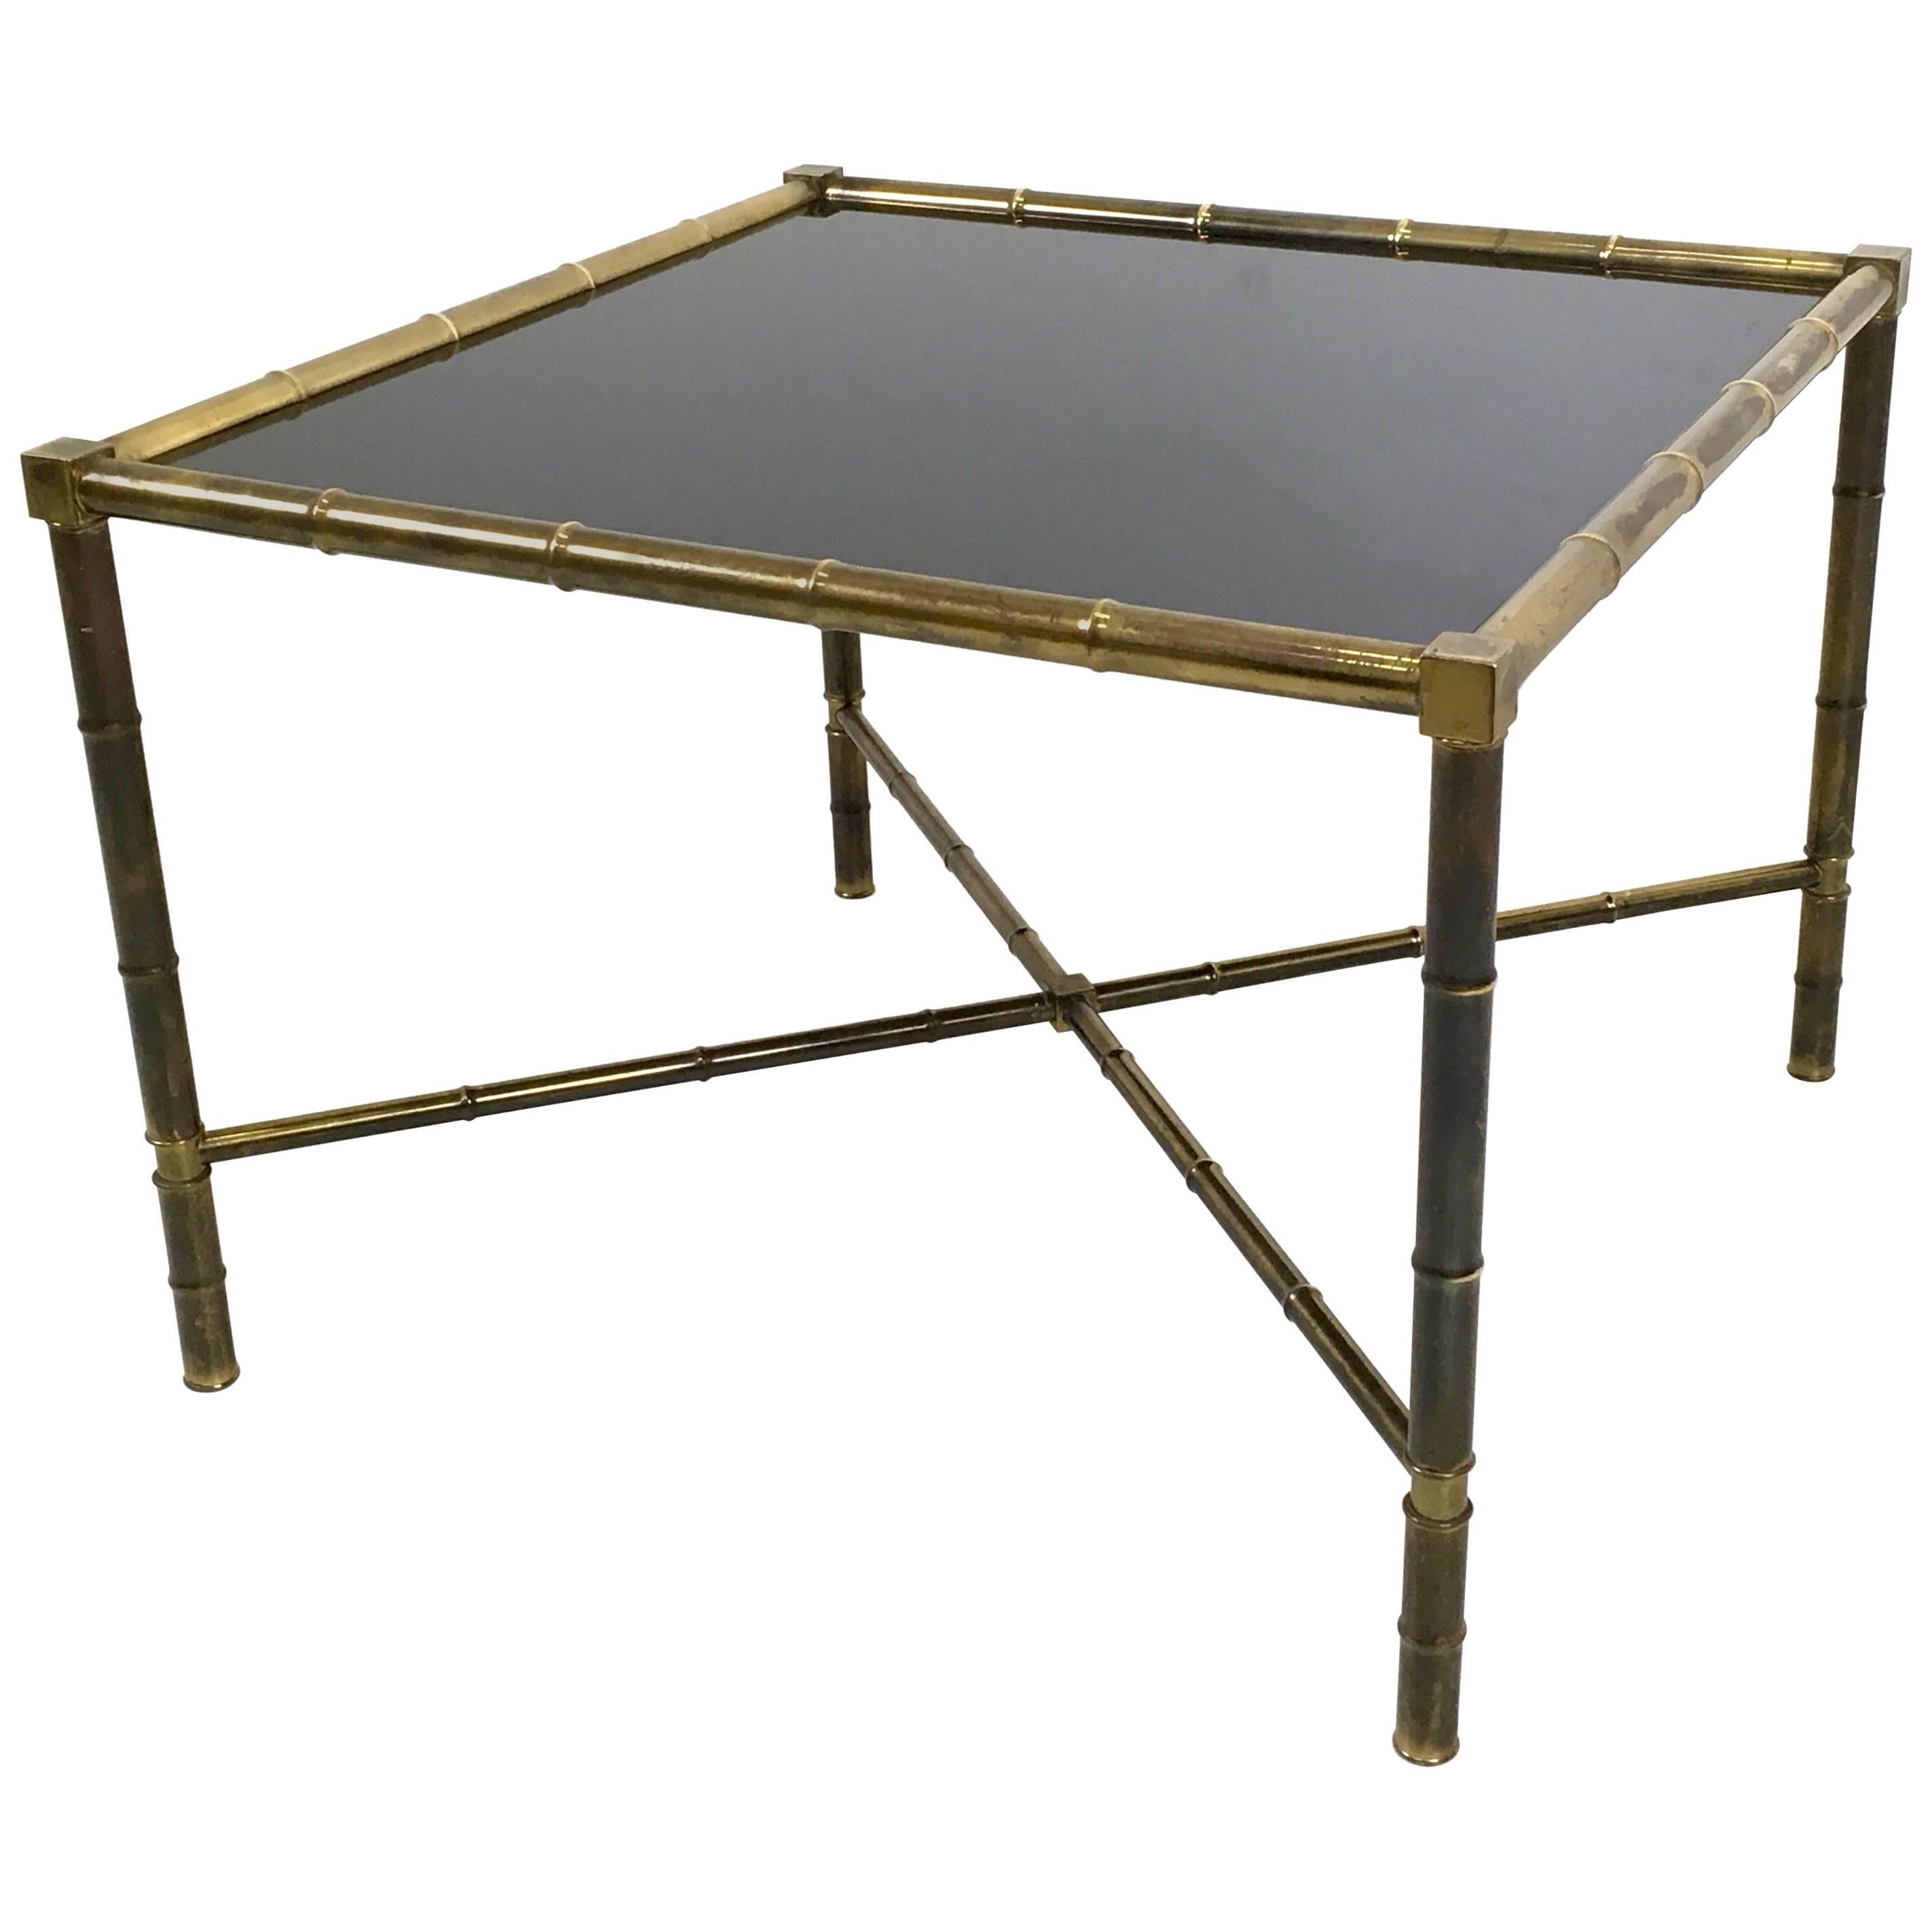 Made in France. 
It features a brass frame and a black opaline glass top.
This coffee table has its original patina, but on request we can clean the brass. 
It is a vintage item, therefore it might show slight traces of use, but it can be